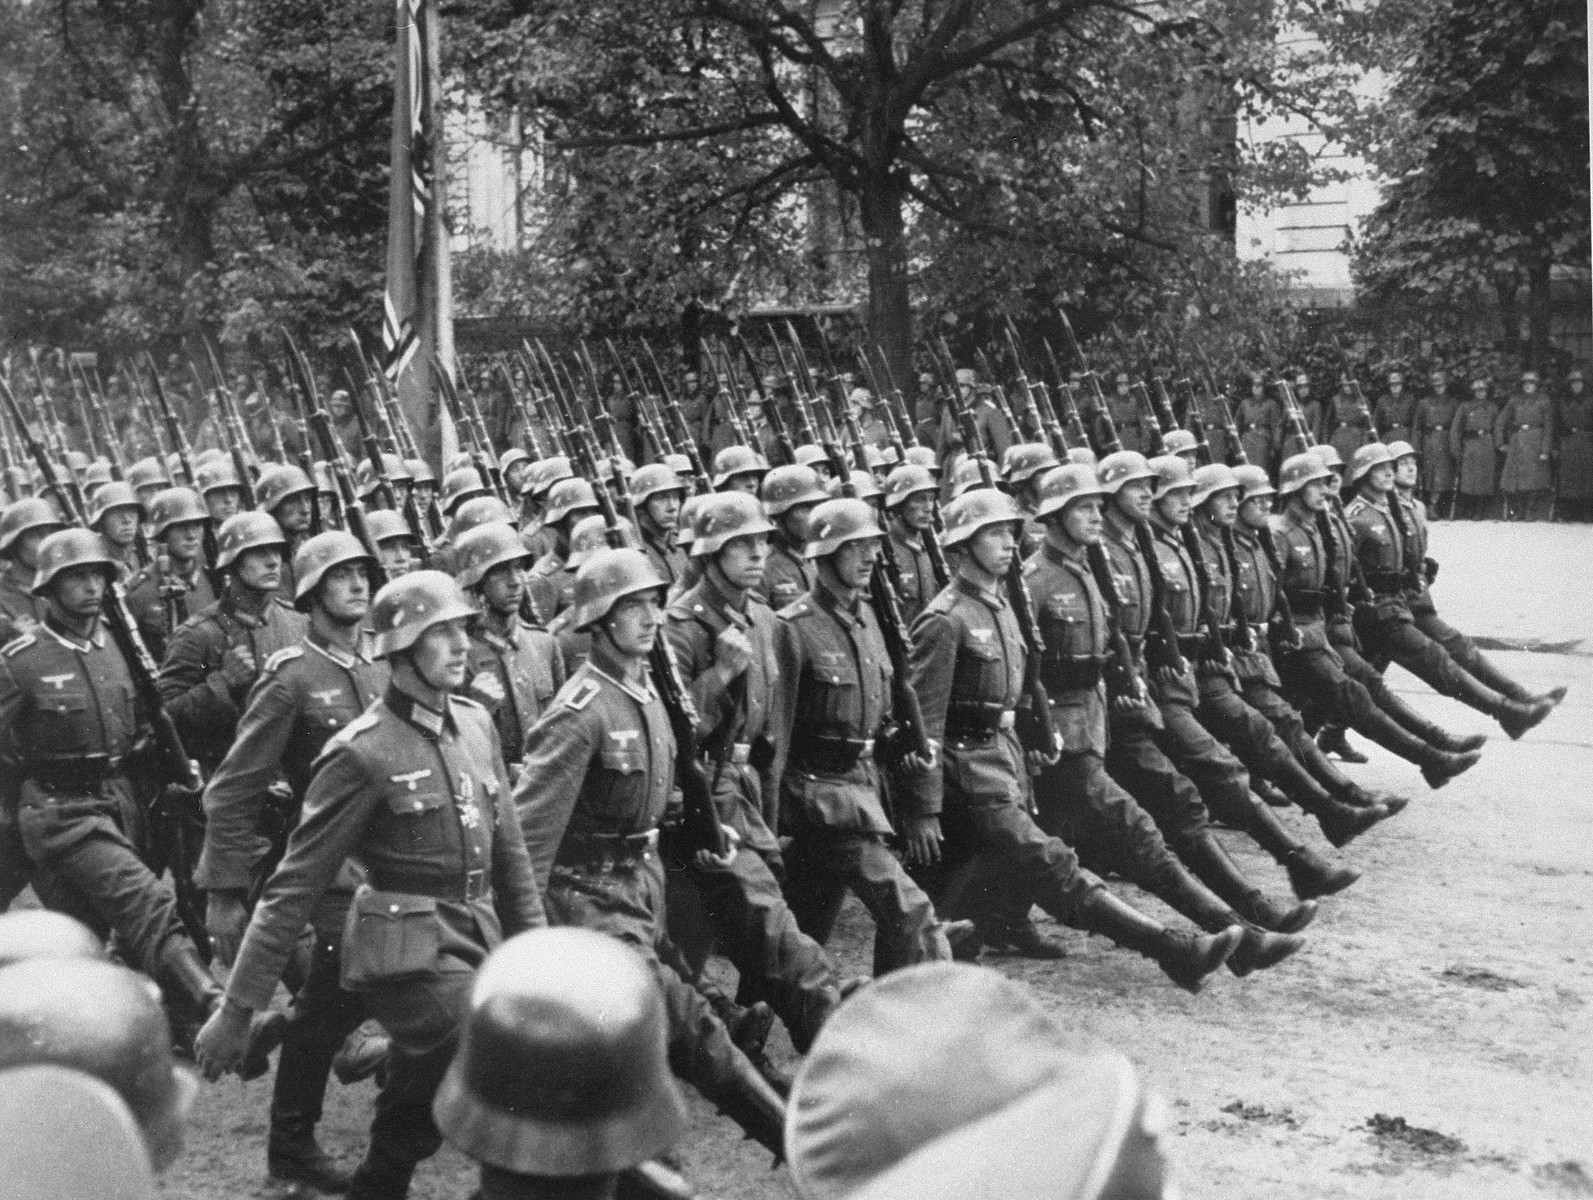 German soldiers parade through Warsaw to celebrate the conquest of Poland.